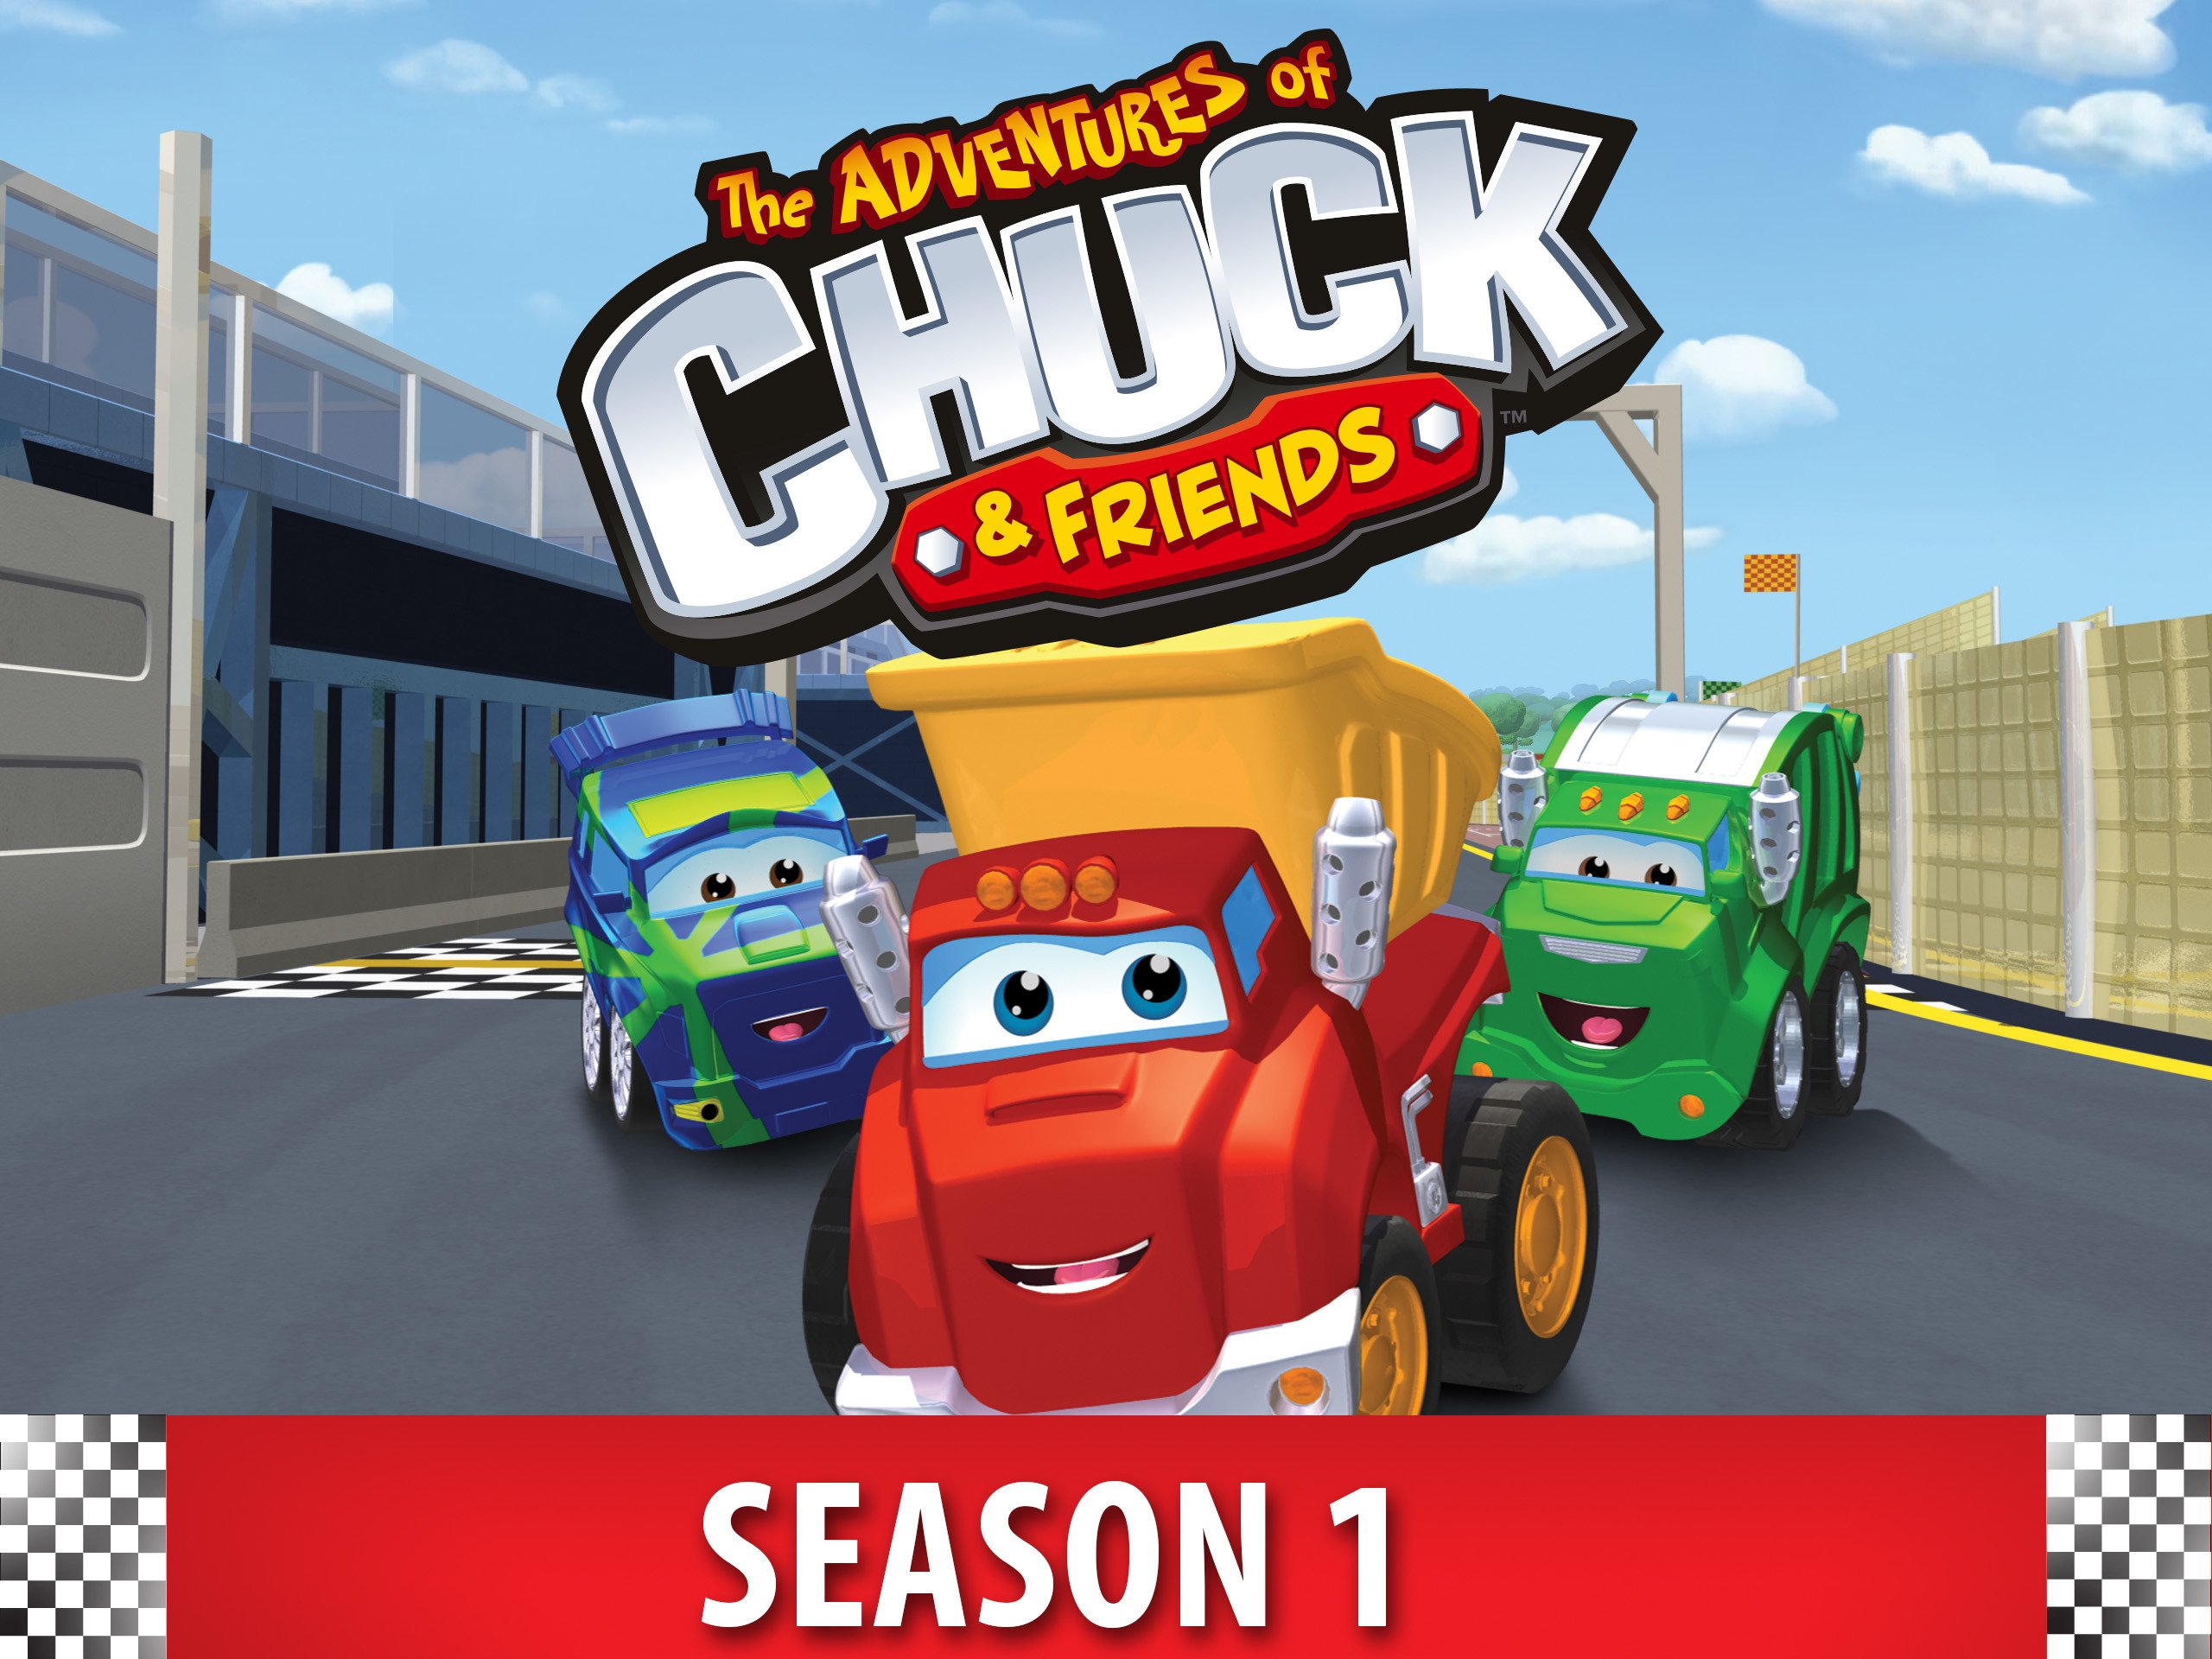 Prime Video: The Adventures of Chuck & Friends